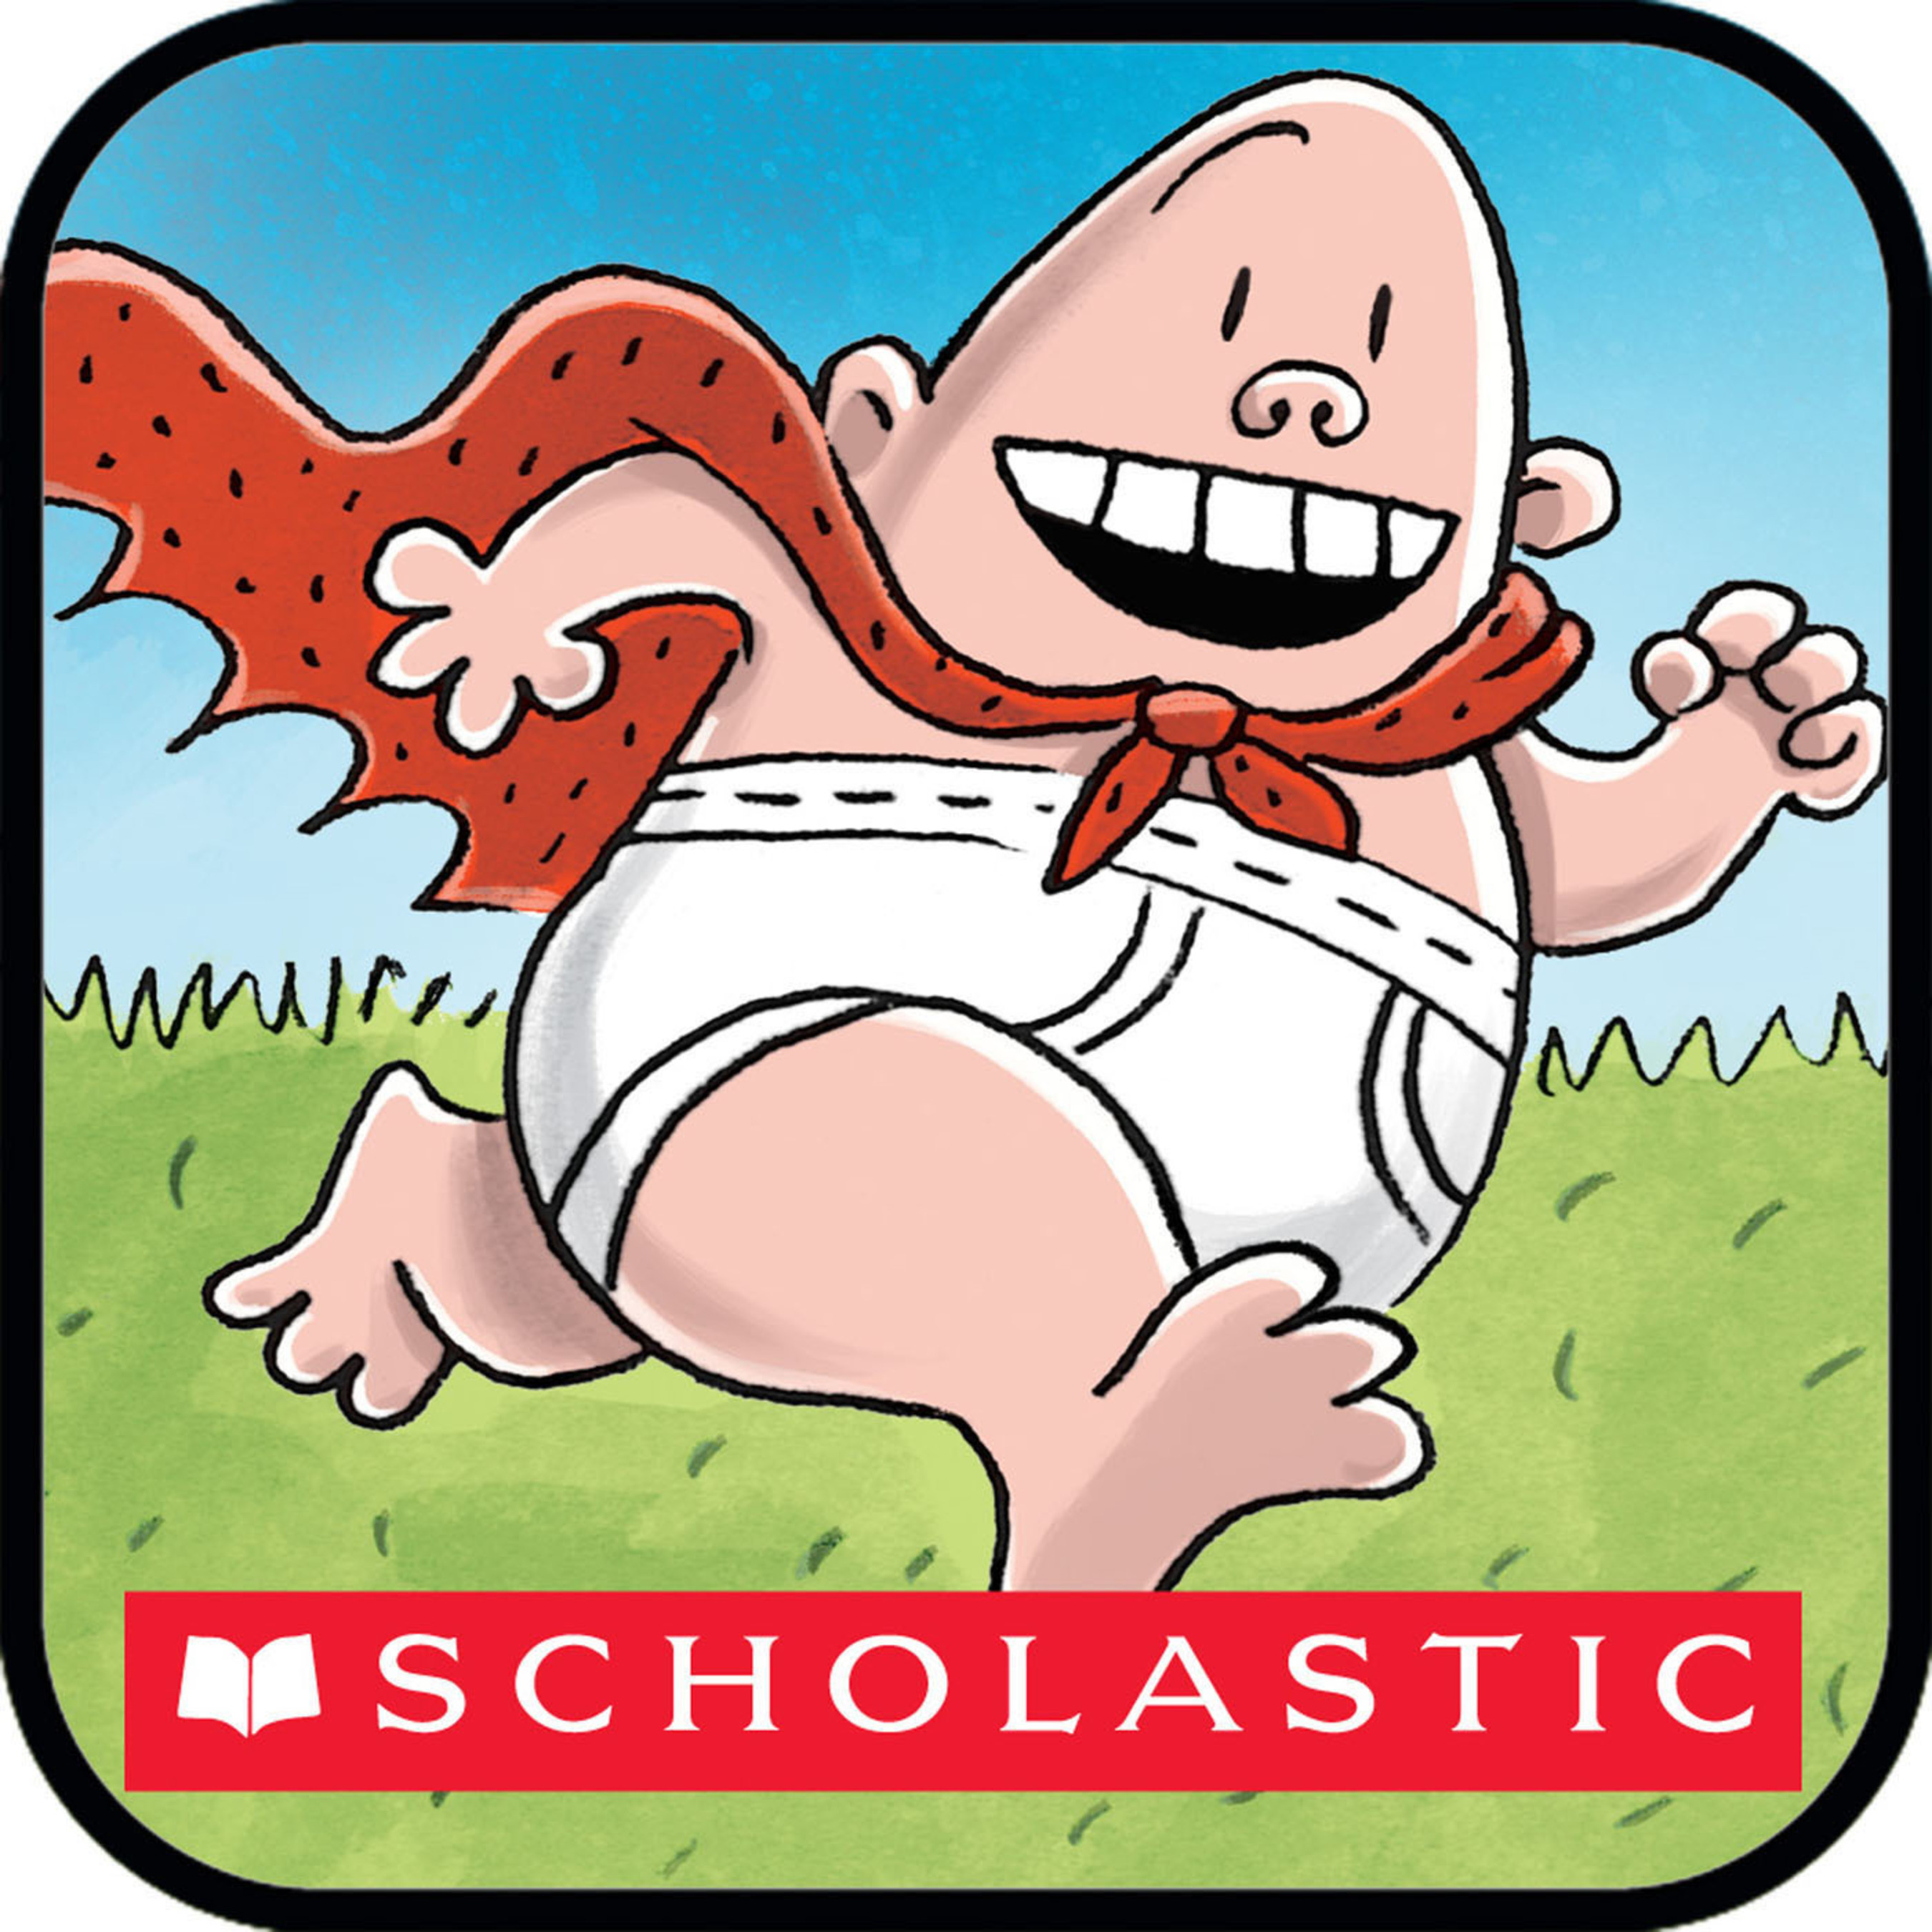 Scholastic Launches The Adventures of Captain Underpants™ App for iPad,  Based on Bestselling Book Series by Dav Pilkey